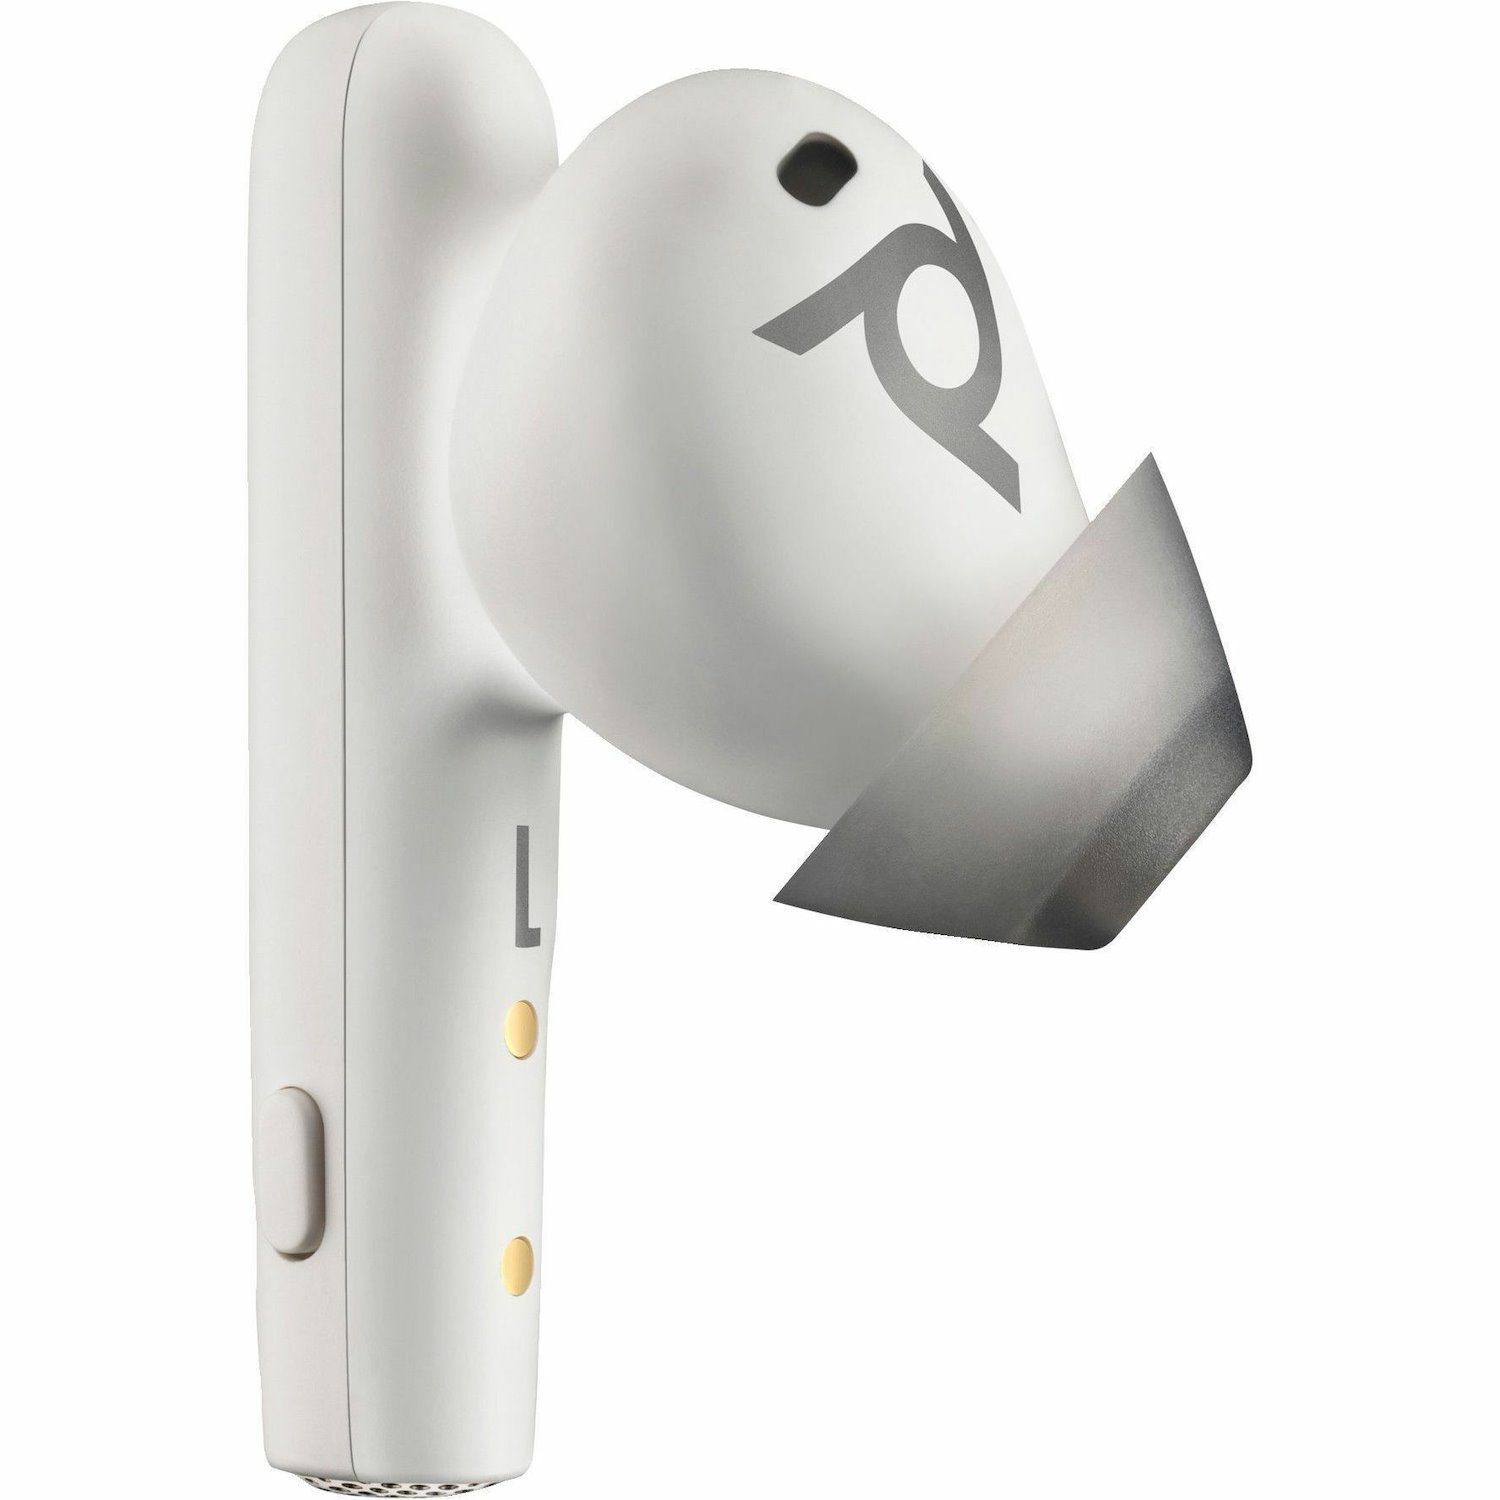 Poly Voyager Free 60 UC True Wireless Earbud Stereo Earset - White Sand